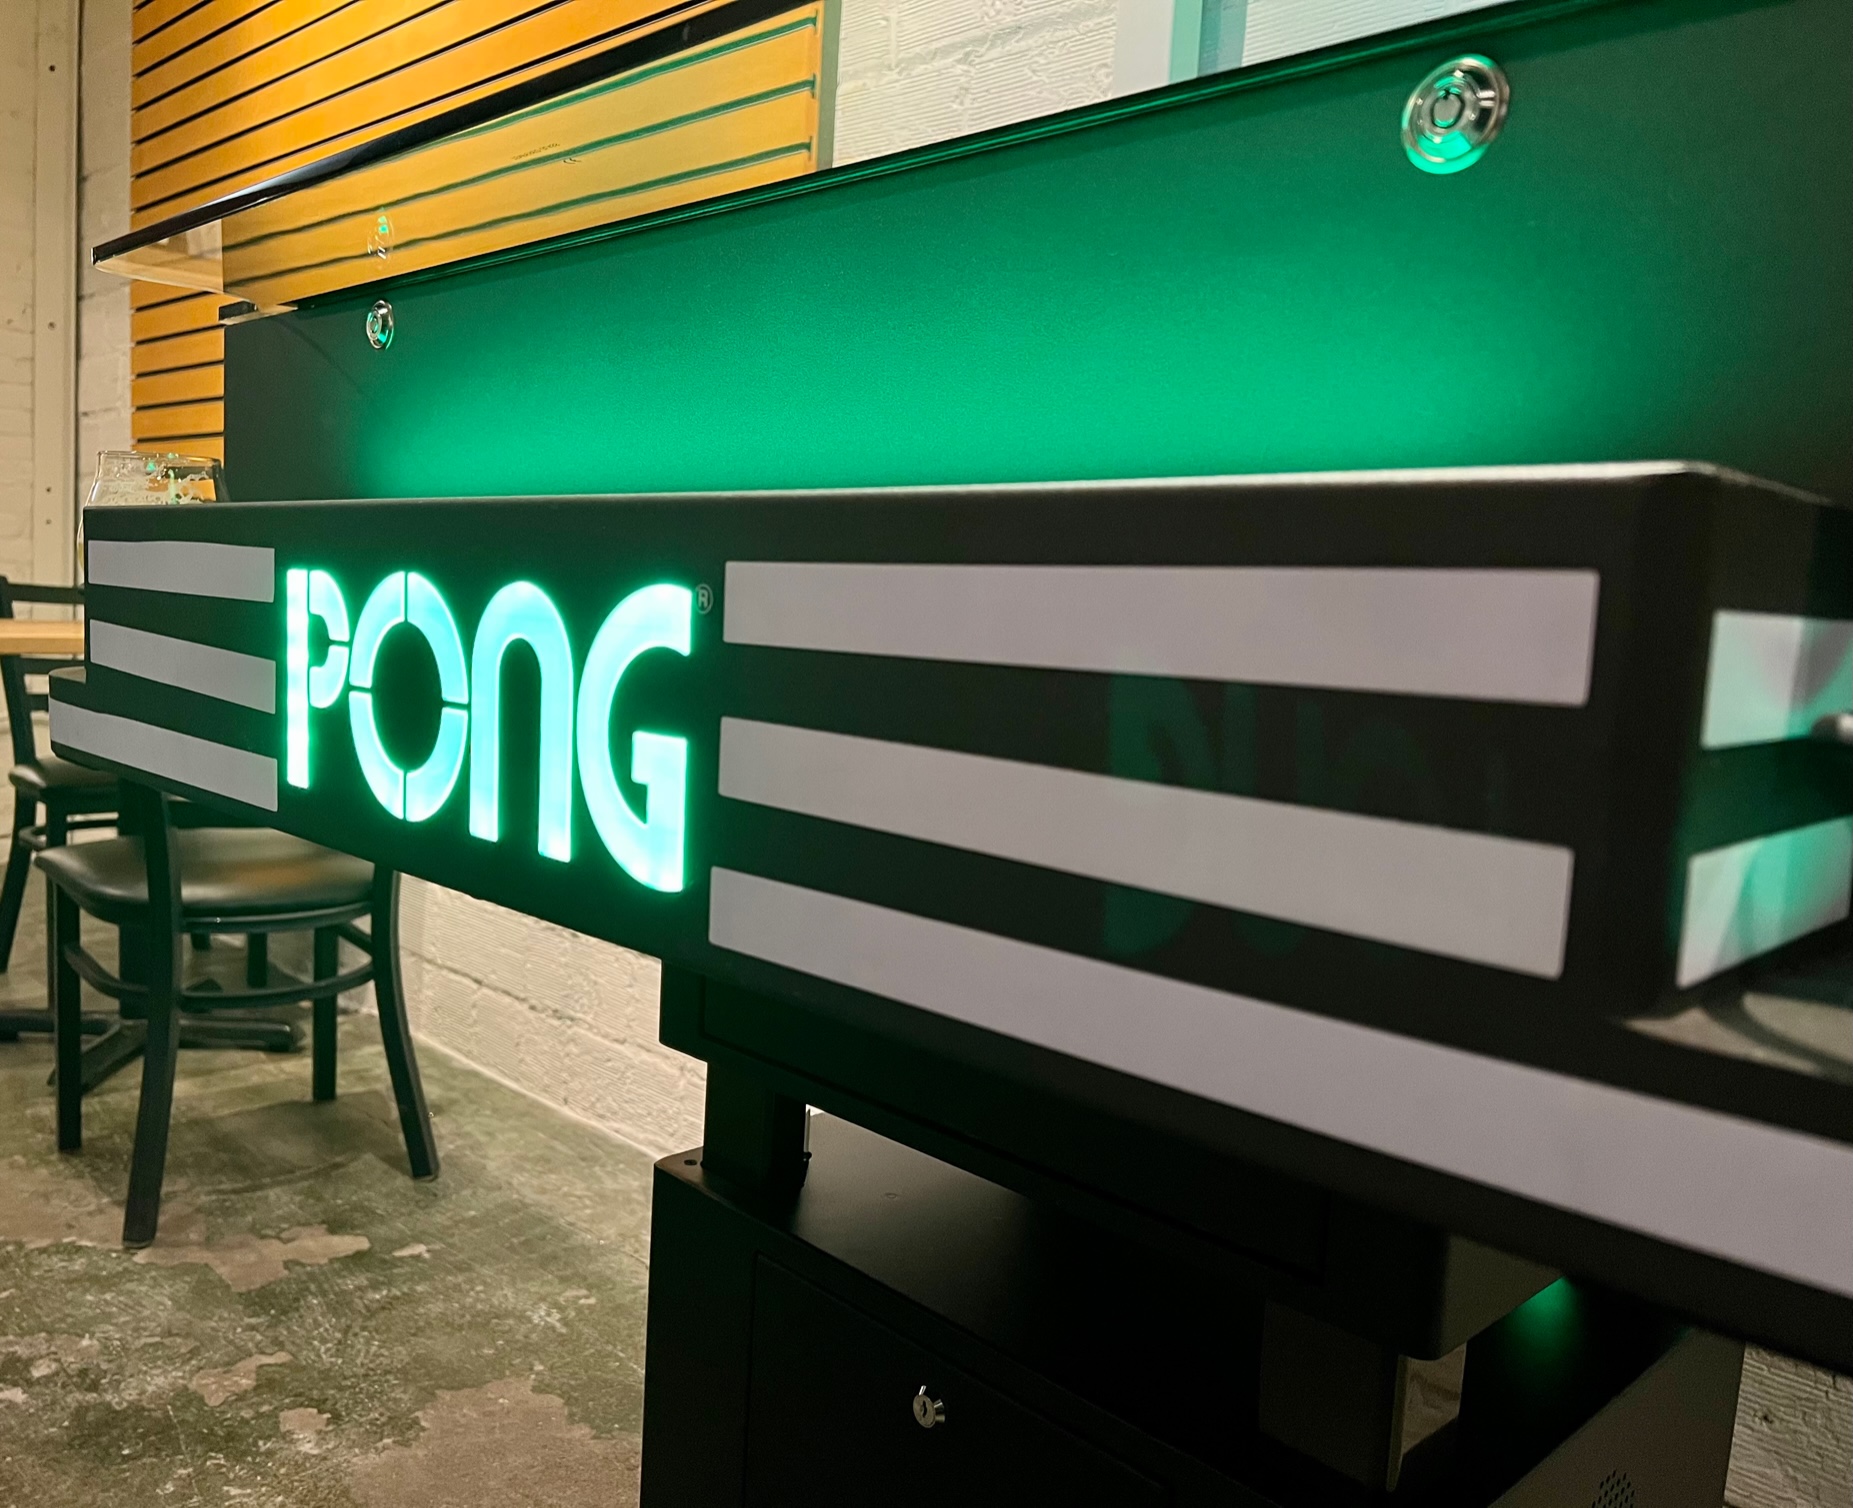 The classic arcade game Pong is available to play at the Level 3 Taproom.